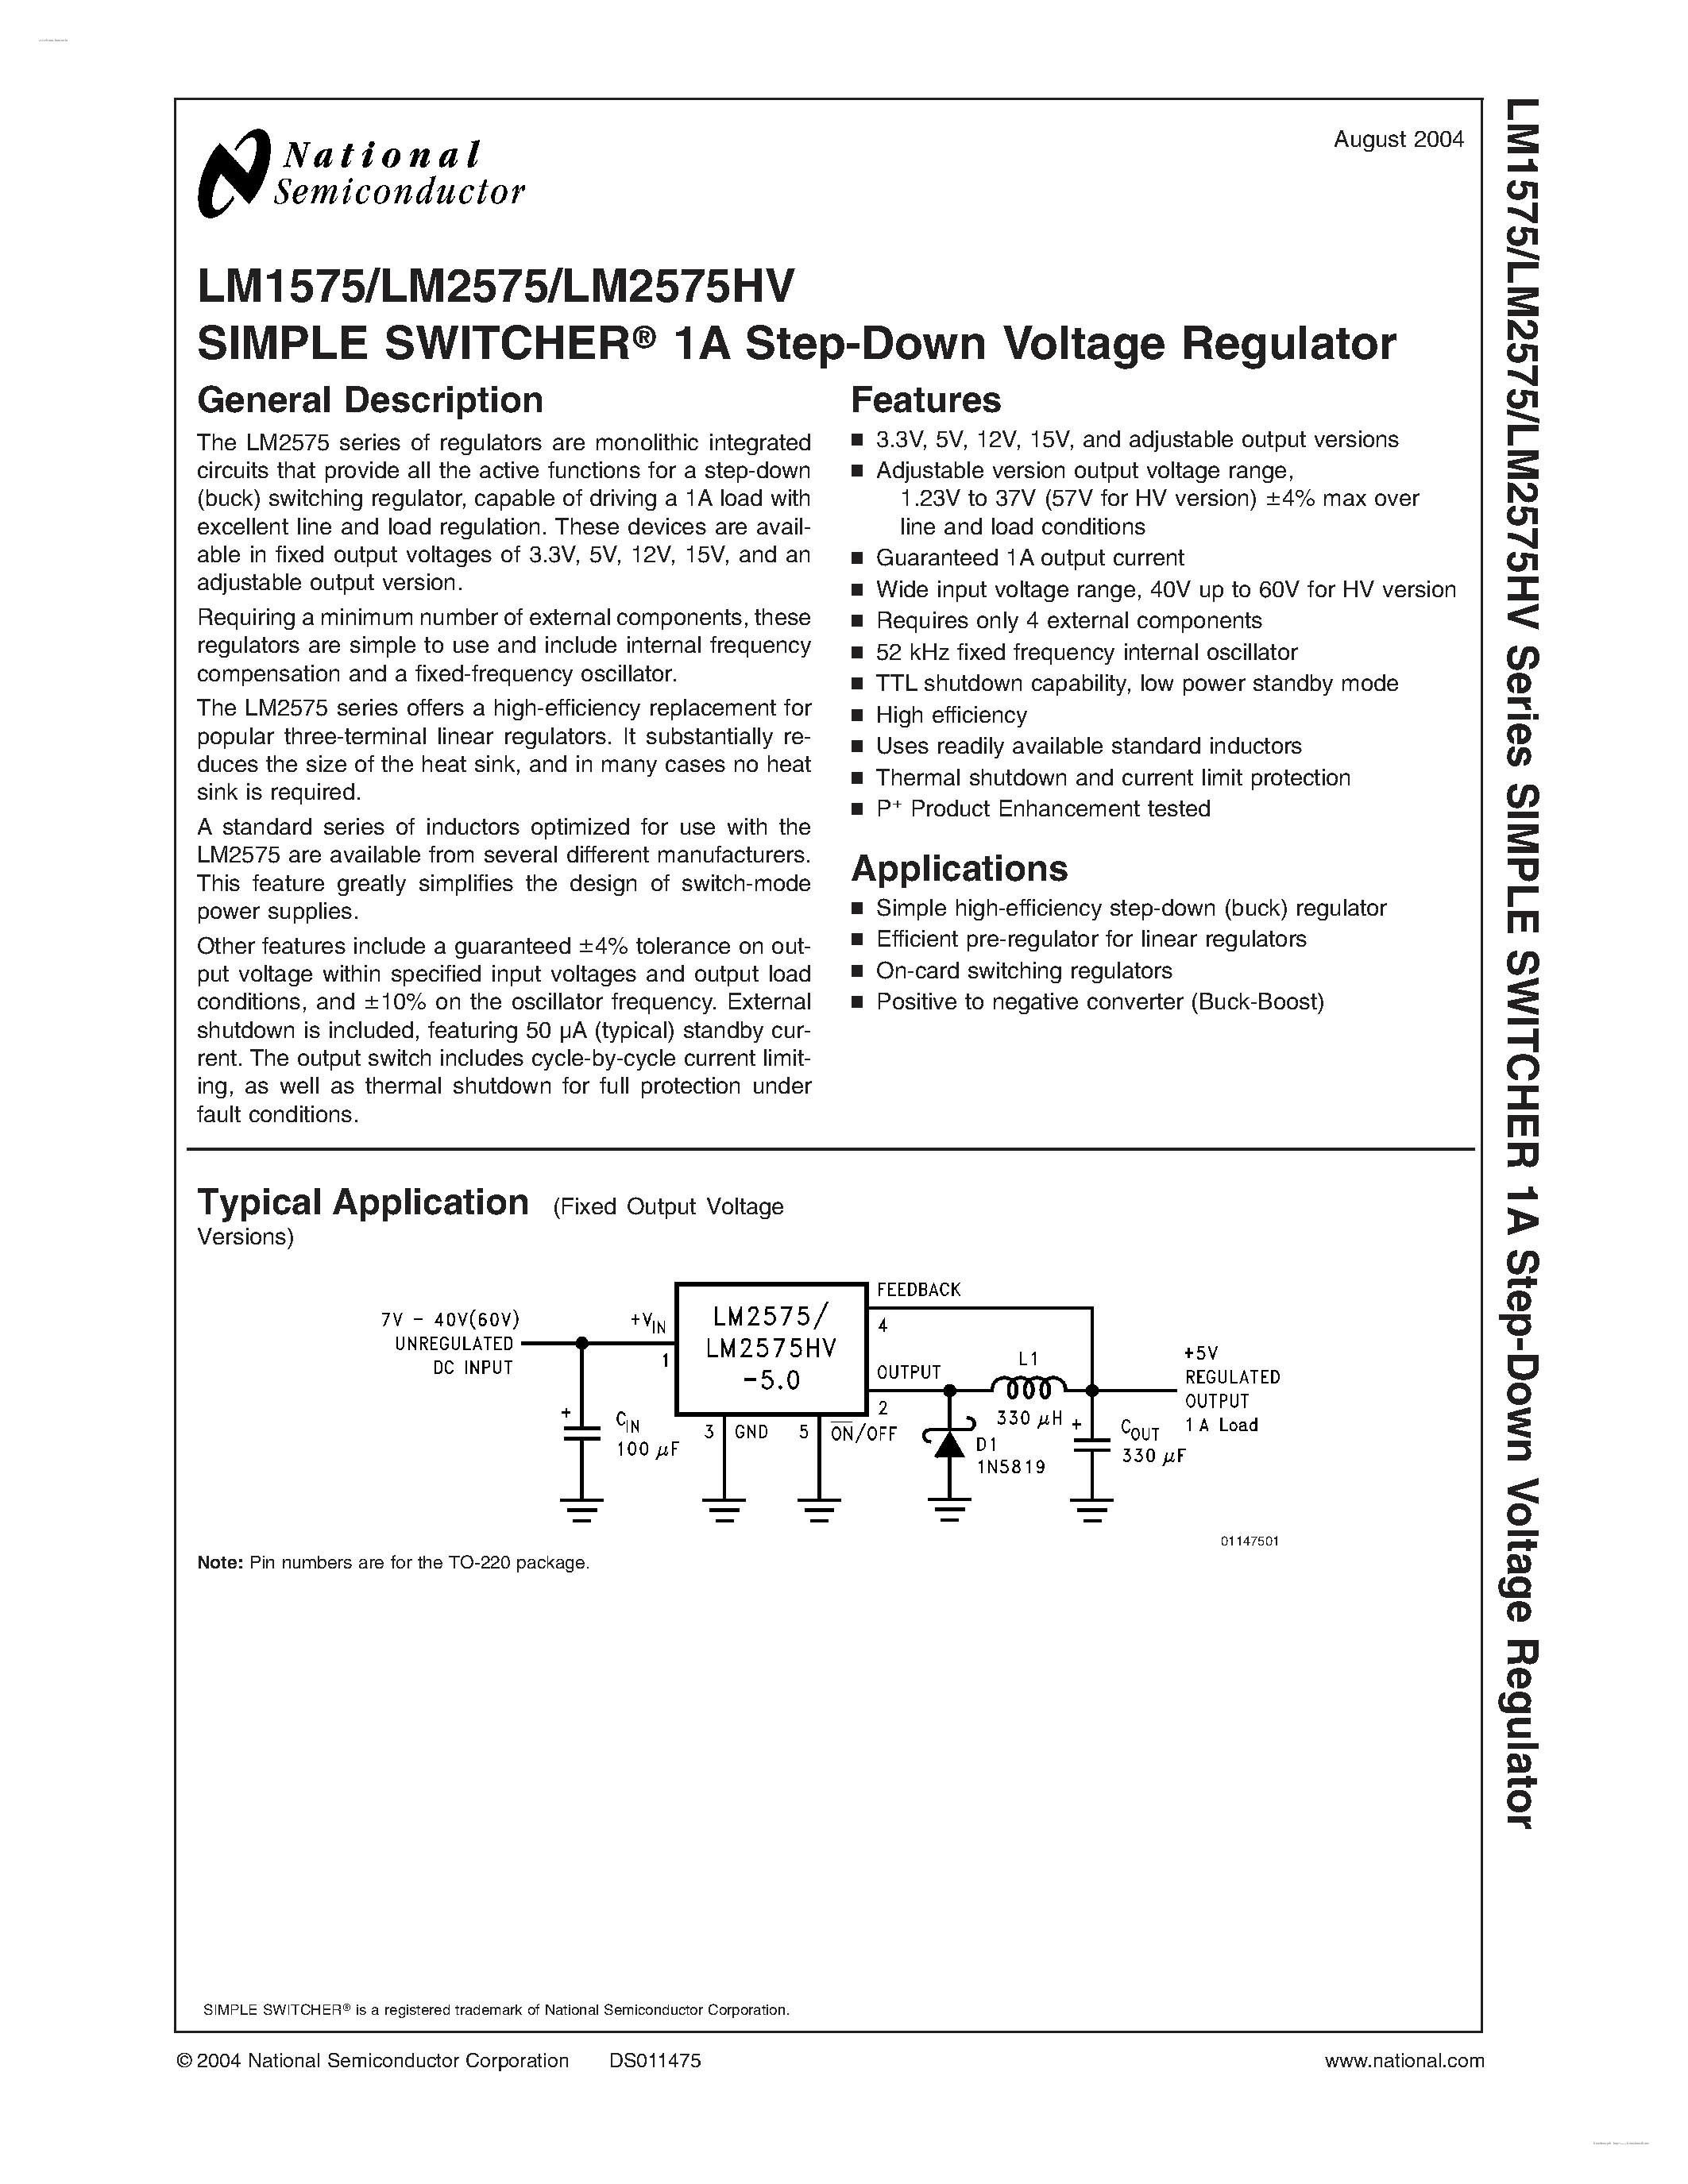 Datasheet 2575T-12 - Search -----> LM2575 page 1